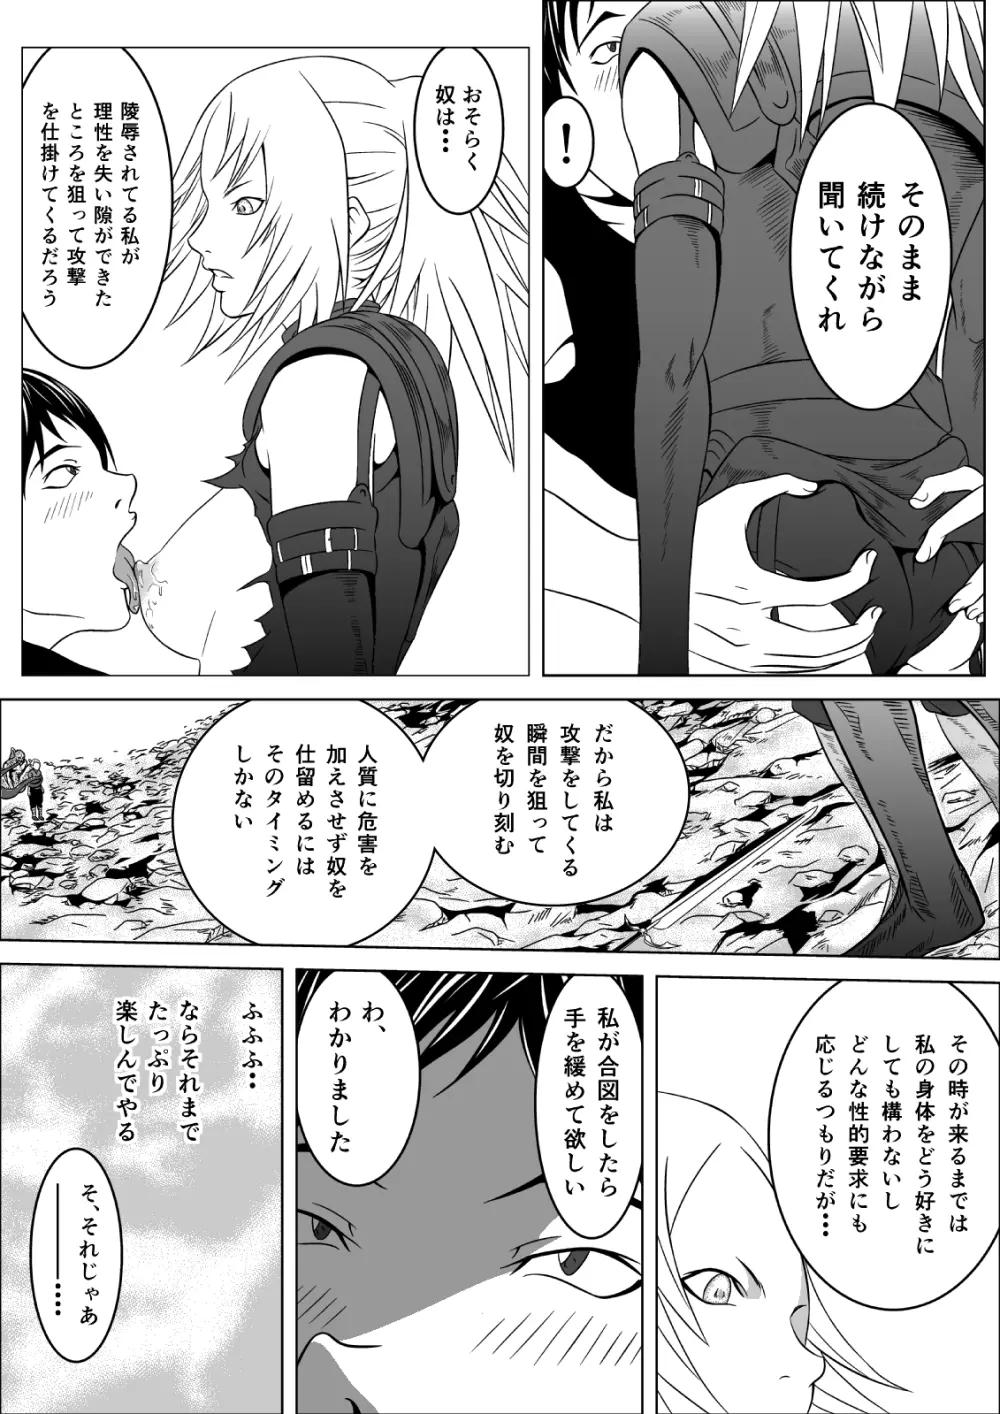 Ce0 嵌められた幻影 - page23